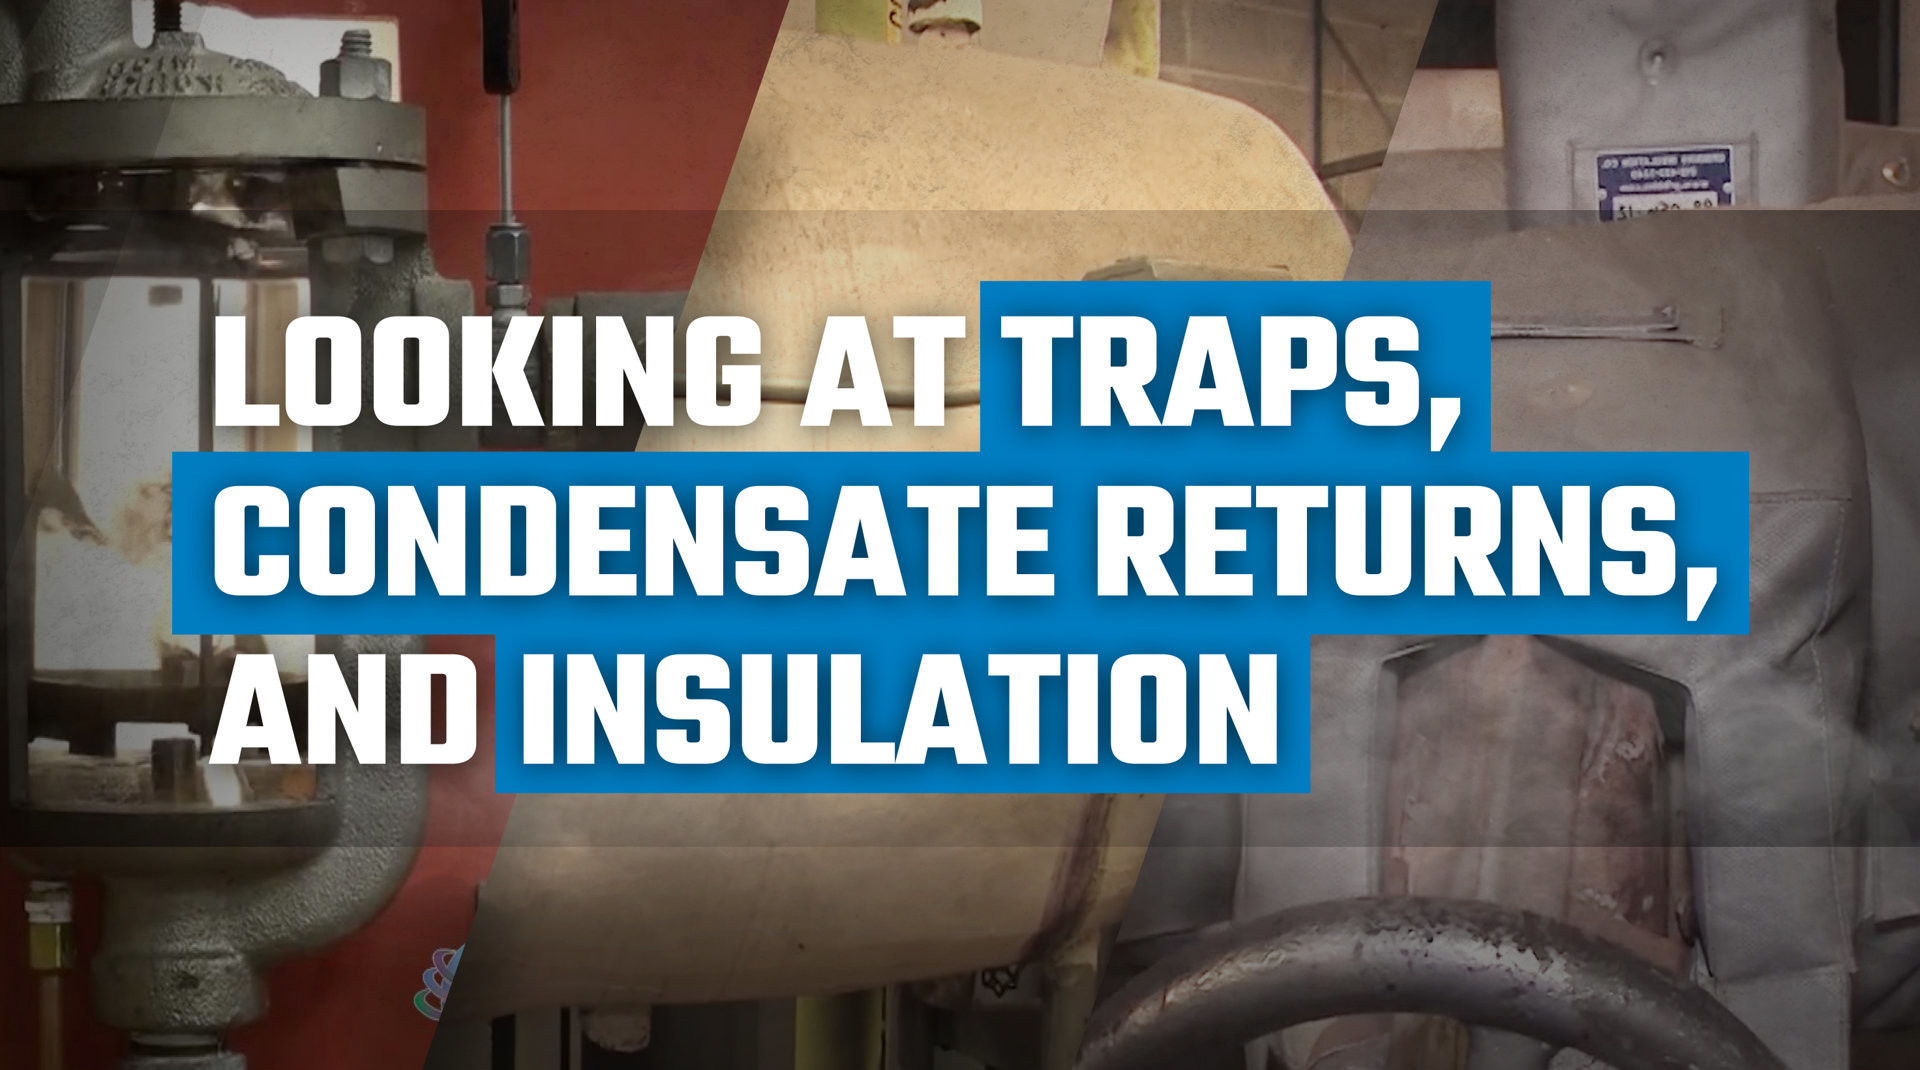 Boiler Traps, Condensate Returns, and Insulation